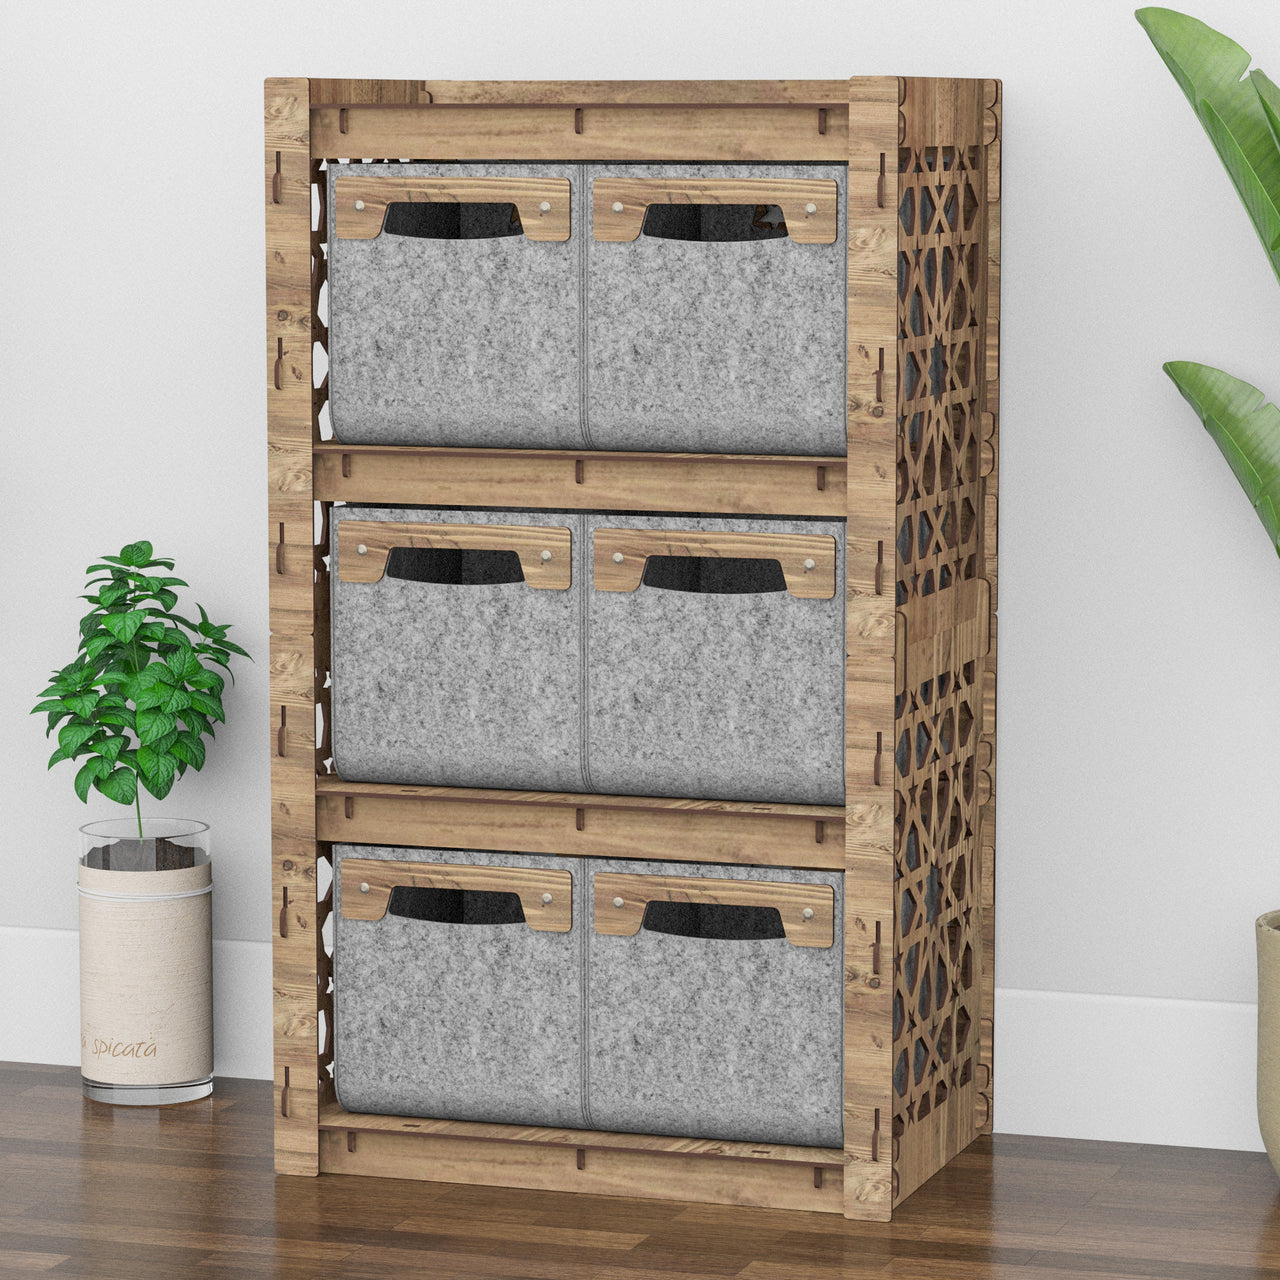 Arabic Chest Of 6 Drawers Storage Cabinet [6 SMALL GRAY BINS]